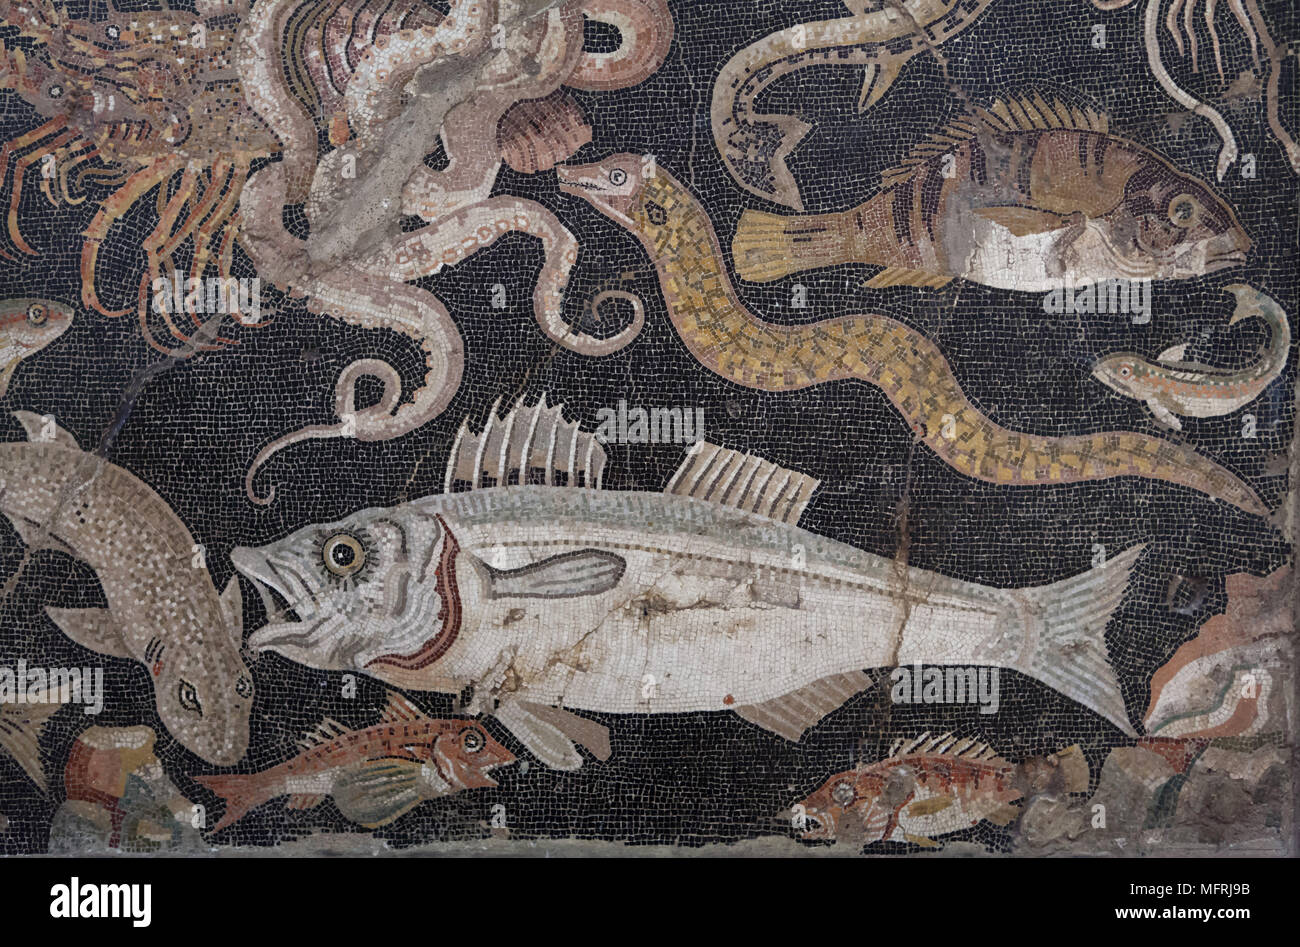 Marine life (Fish catalogue) depicted in the Roman mosaic from the Casa di Lucius Aelius Magnus (House of Lucius Aelius Magnus) in Pompeii, now on display in the National Archaeological Museum (Museo Archeologico Nazionale di Napoli) in Naples, Campania, Italy. European conger (Conger conger) is depicted in the mosaic. Stock Photo